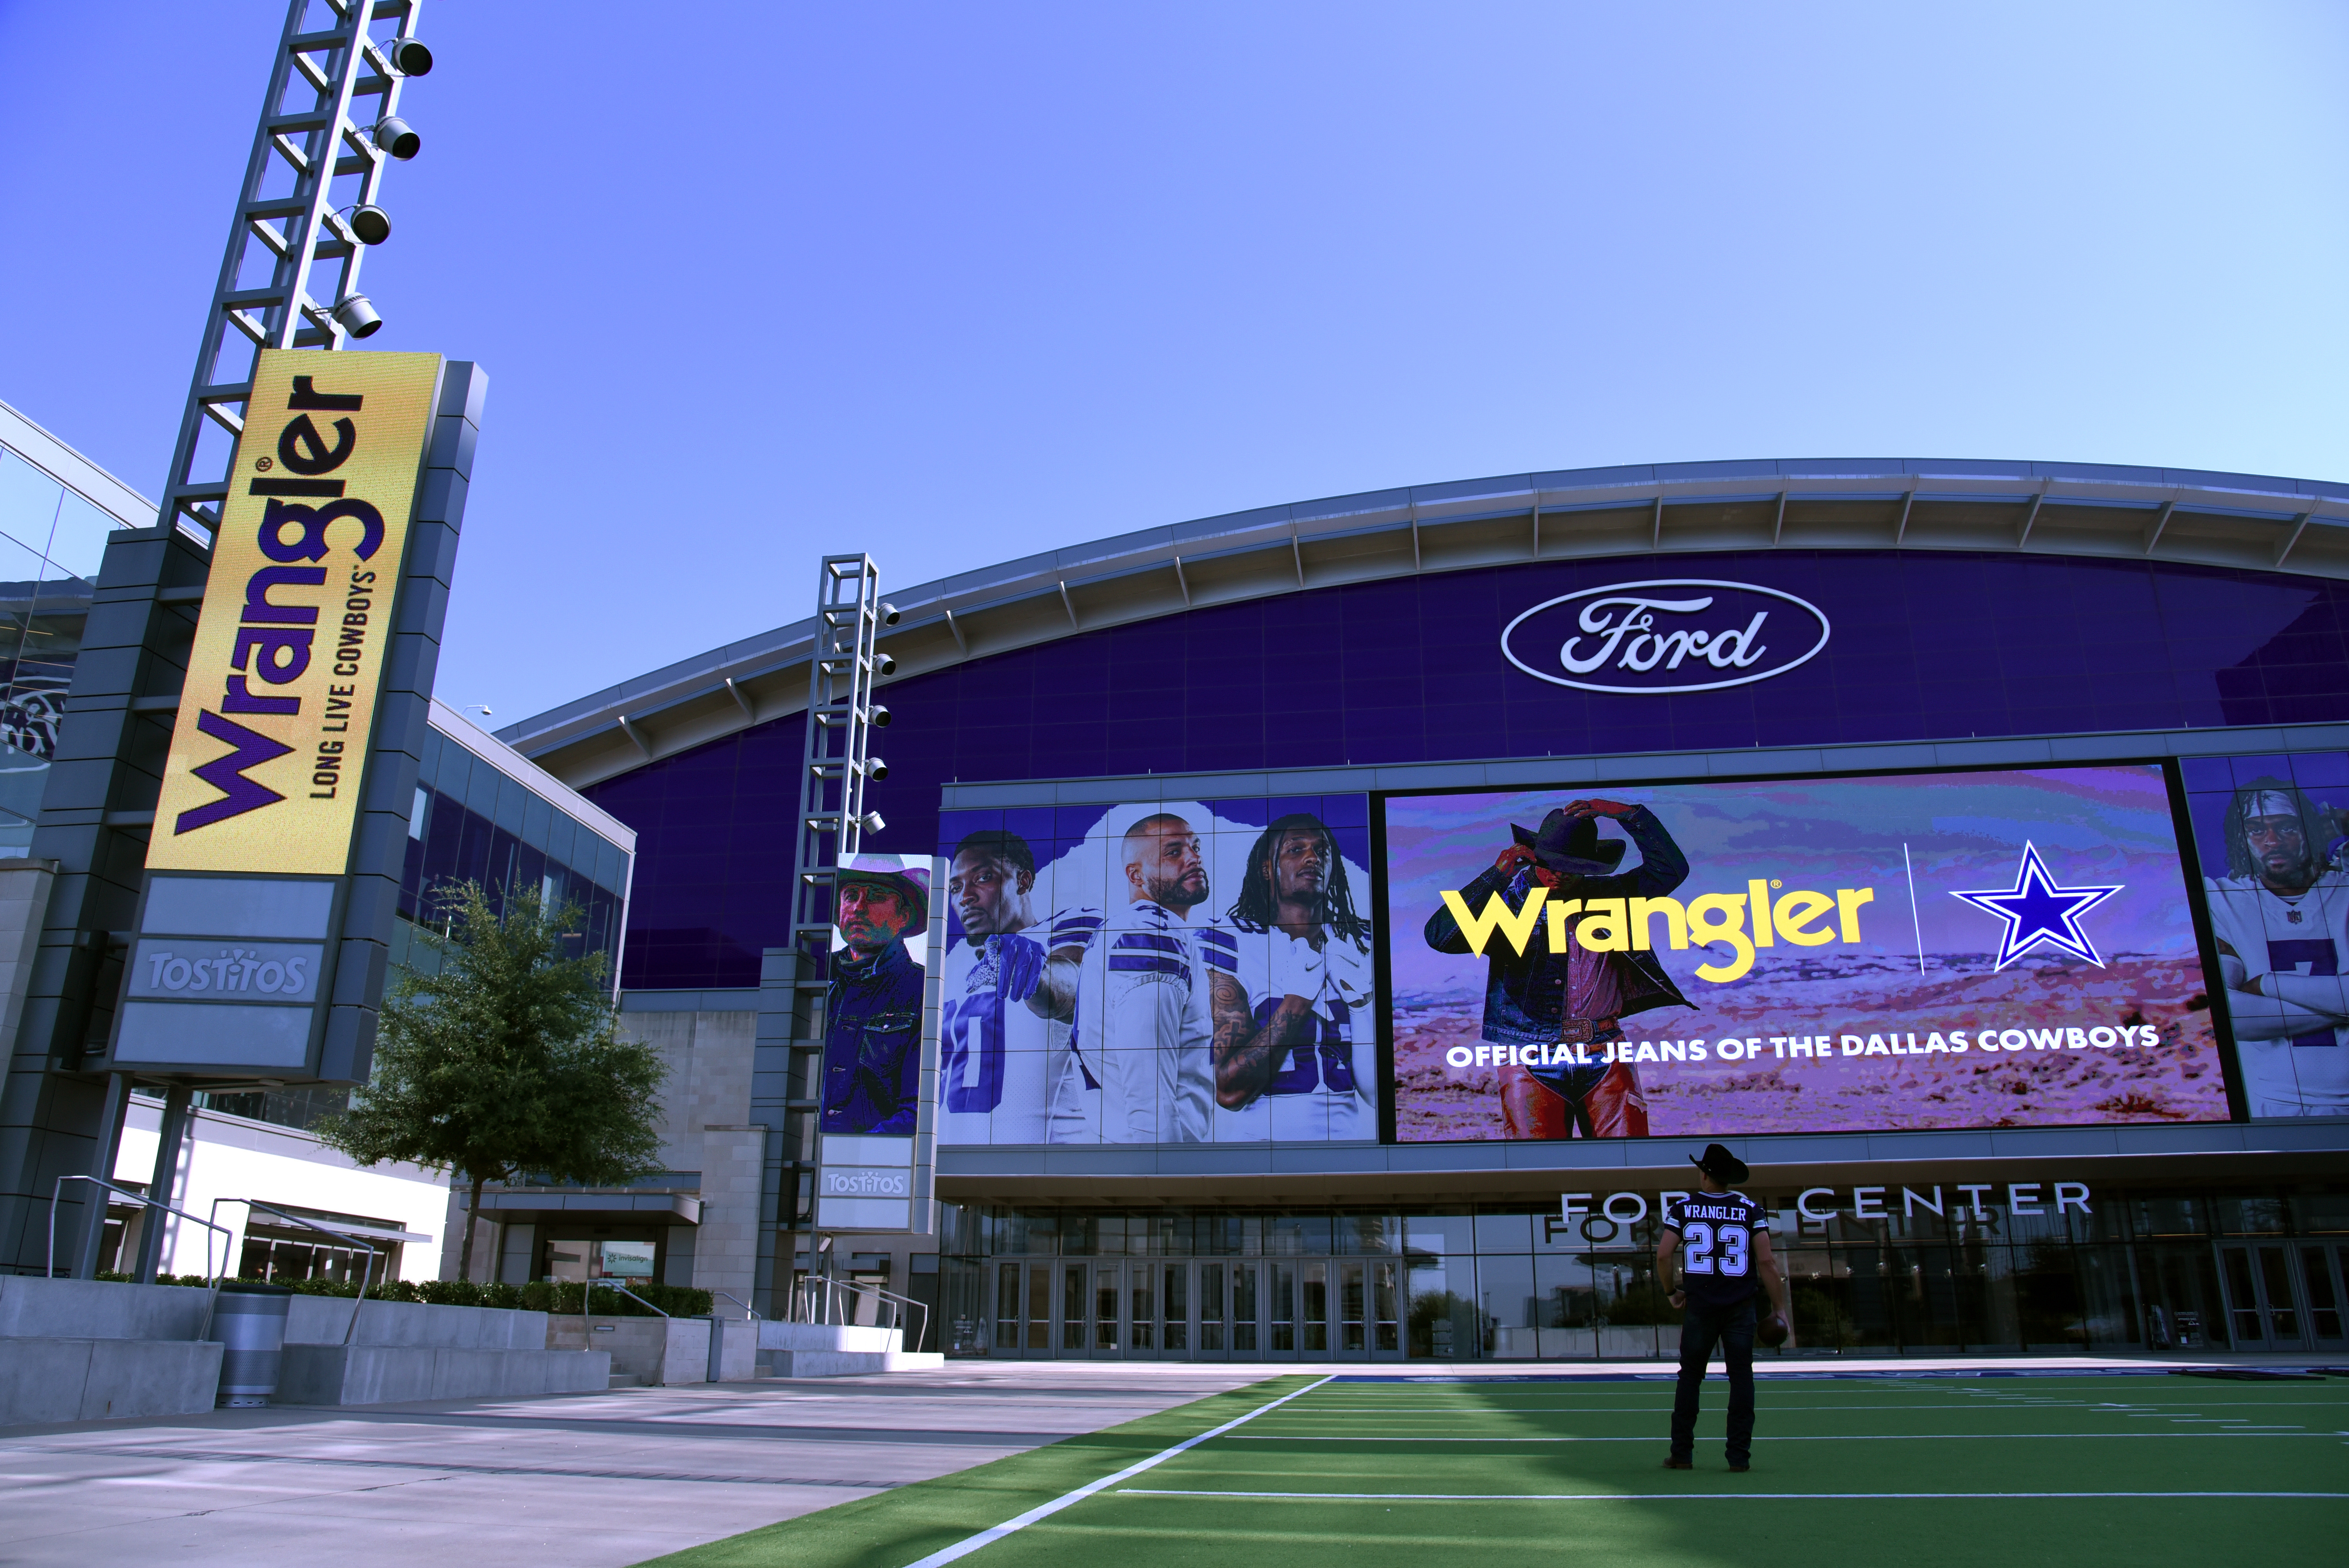 Wrangler® Becomes the Official Jeans of the Dallas Cowboys